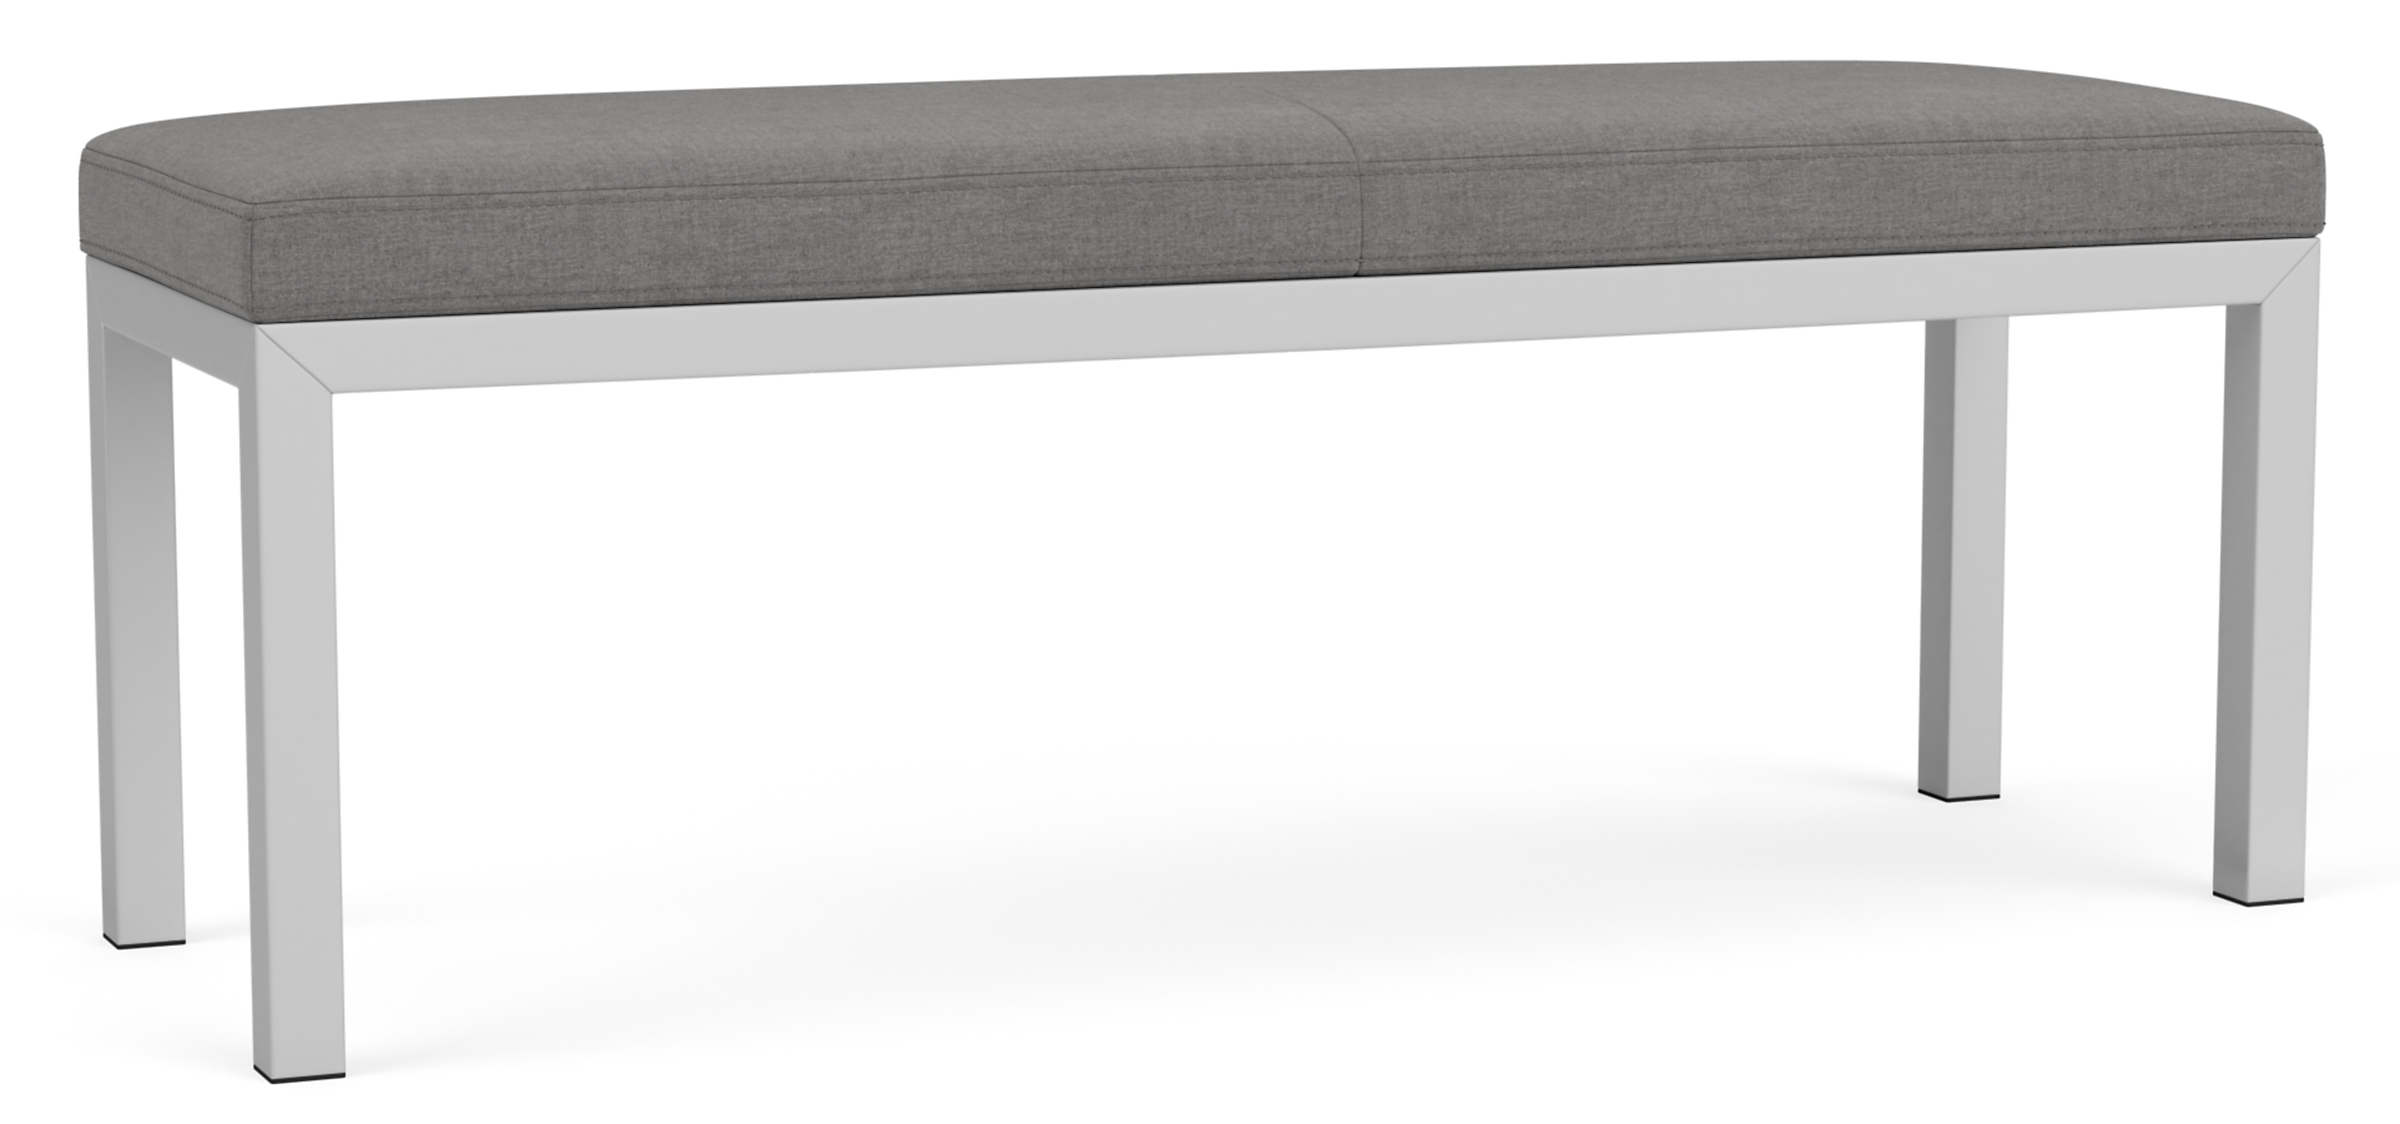 Parsons 46w 15d 18h Outdoor Bench